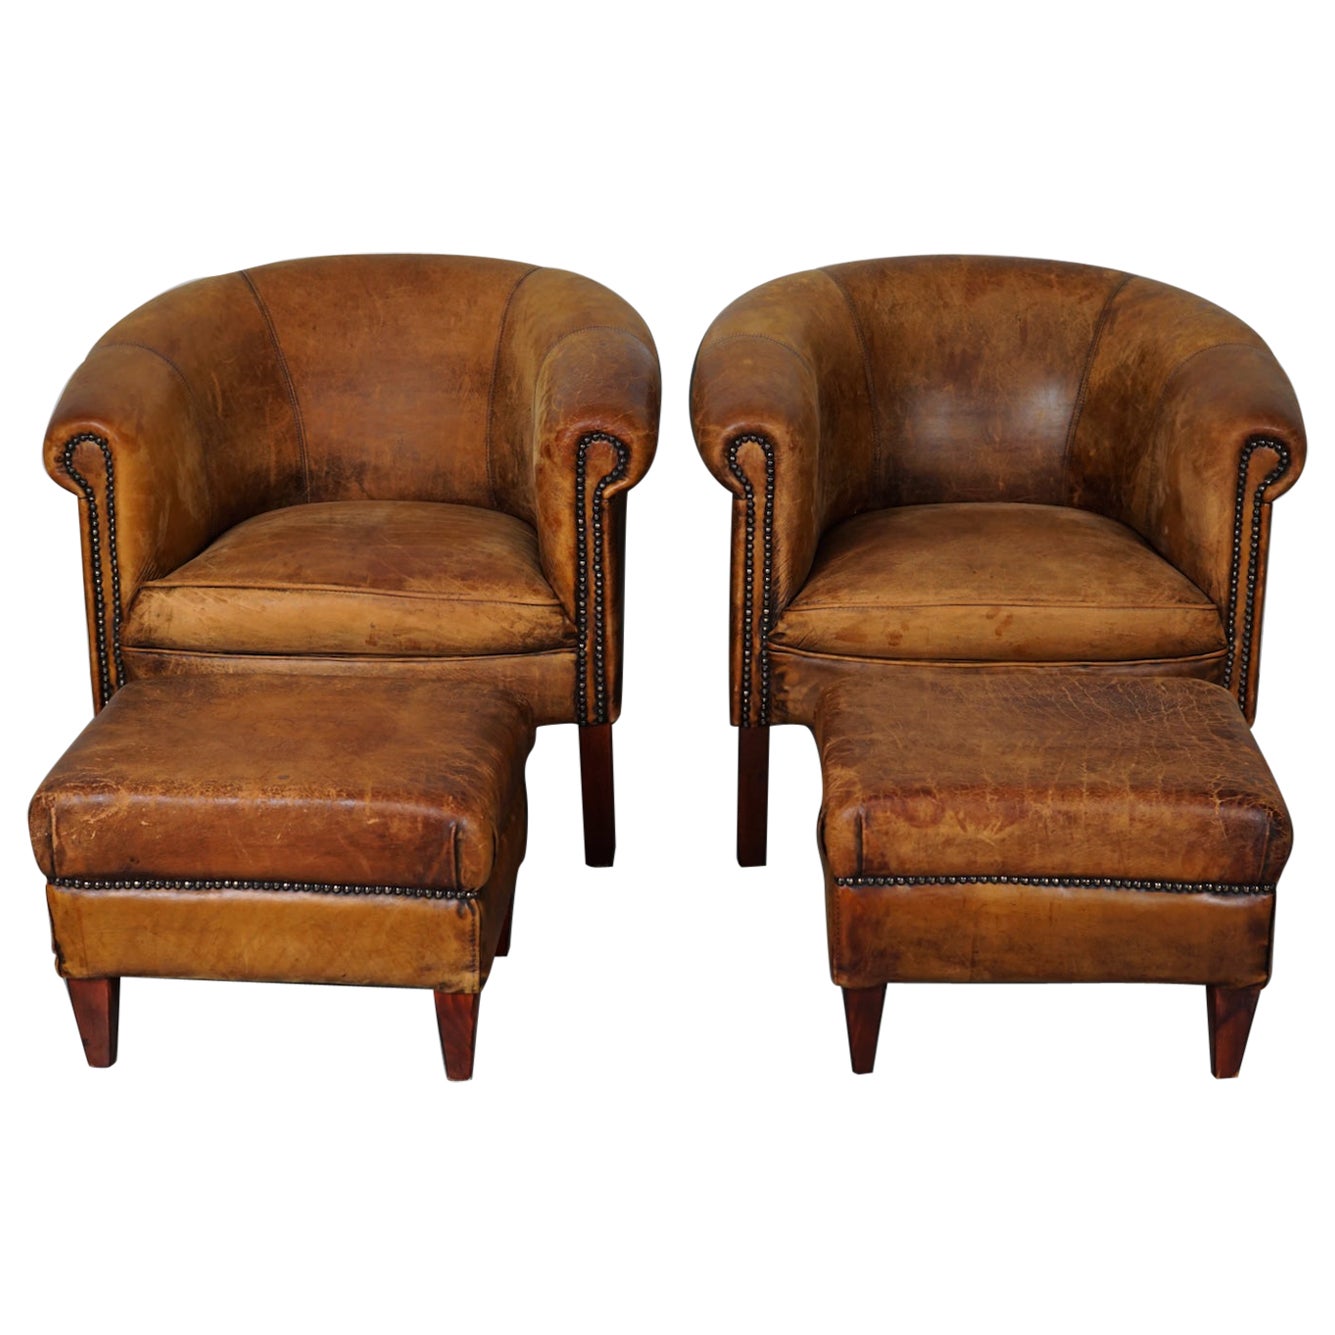 Vintage Dutch Cognac Colored Leather Club Chair, Set of 2 with Footstools For Sale